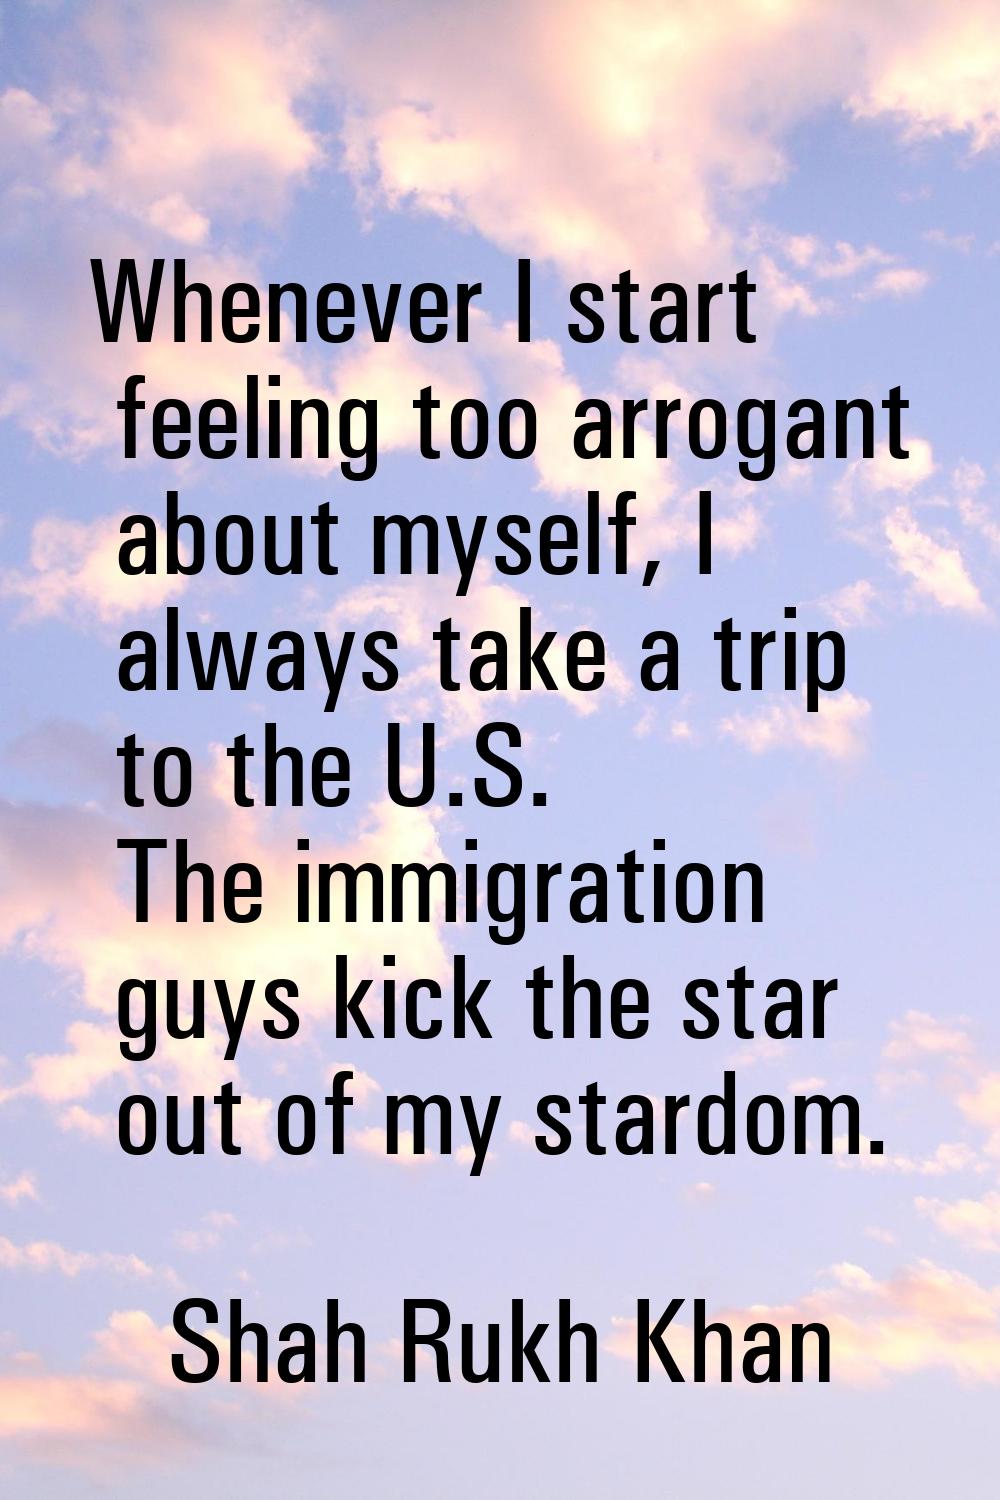 Whenever I start feeling too arrogant about myself, I always take a trip to the U.S. The immigratio